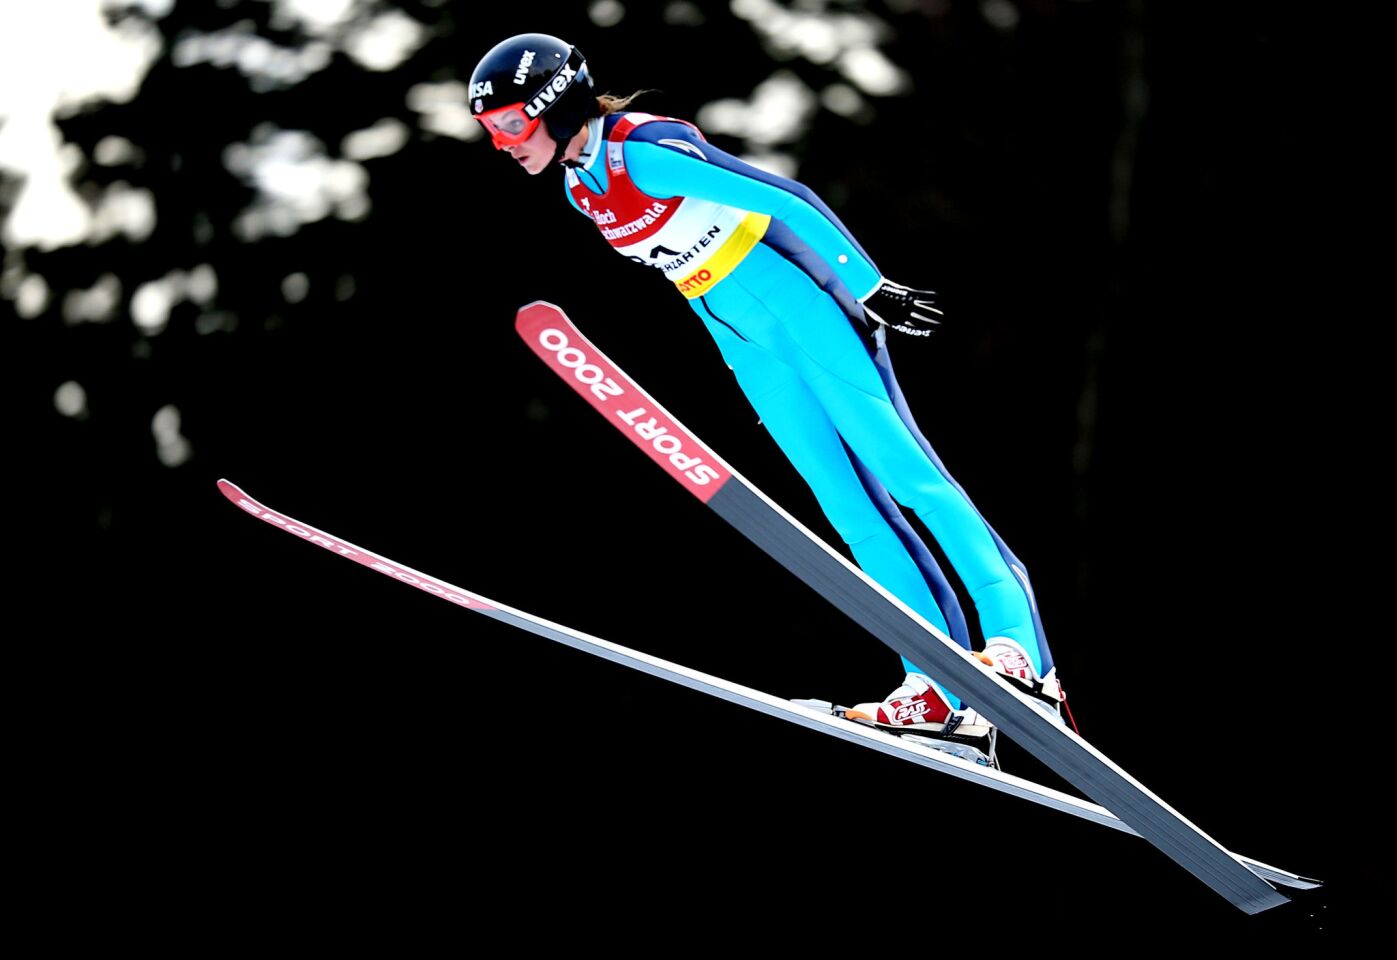 Nina Lussi competes in the qualification jump of a World Cup event on Dec. 22 in Hinterzarten, Germany.